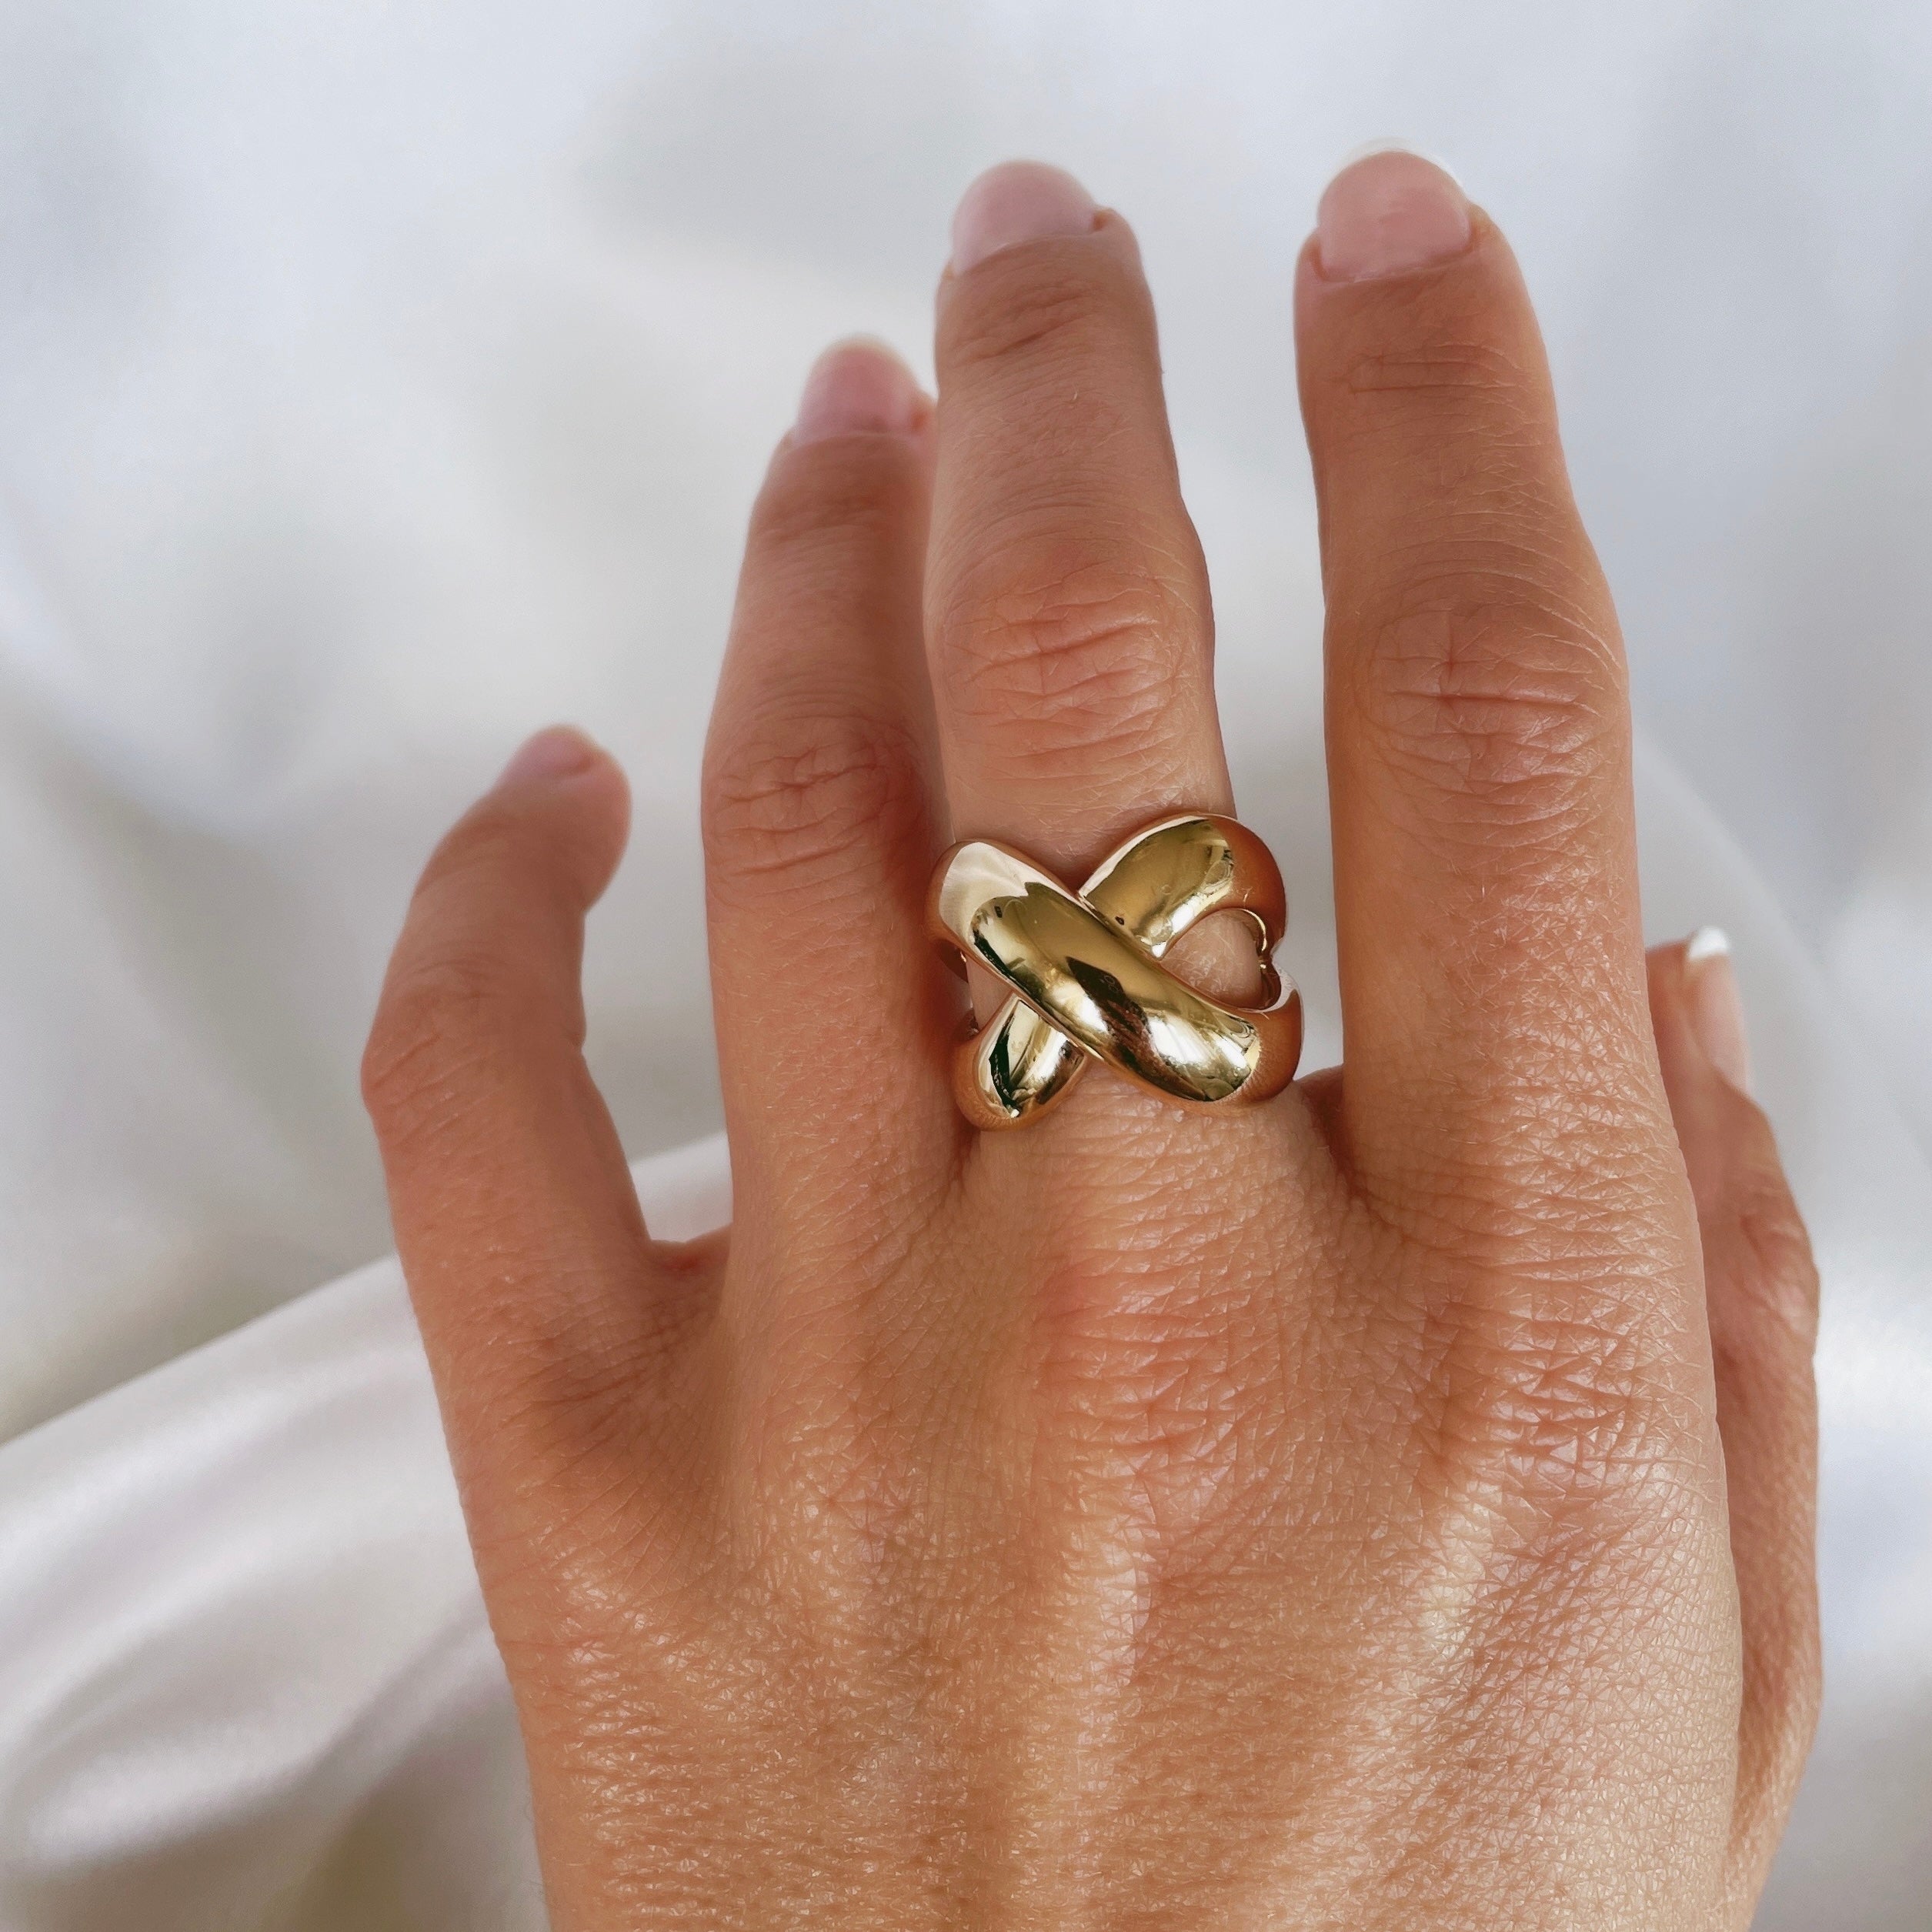 Gold-plated “Link” ring